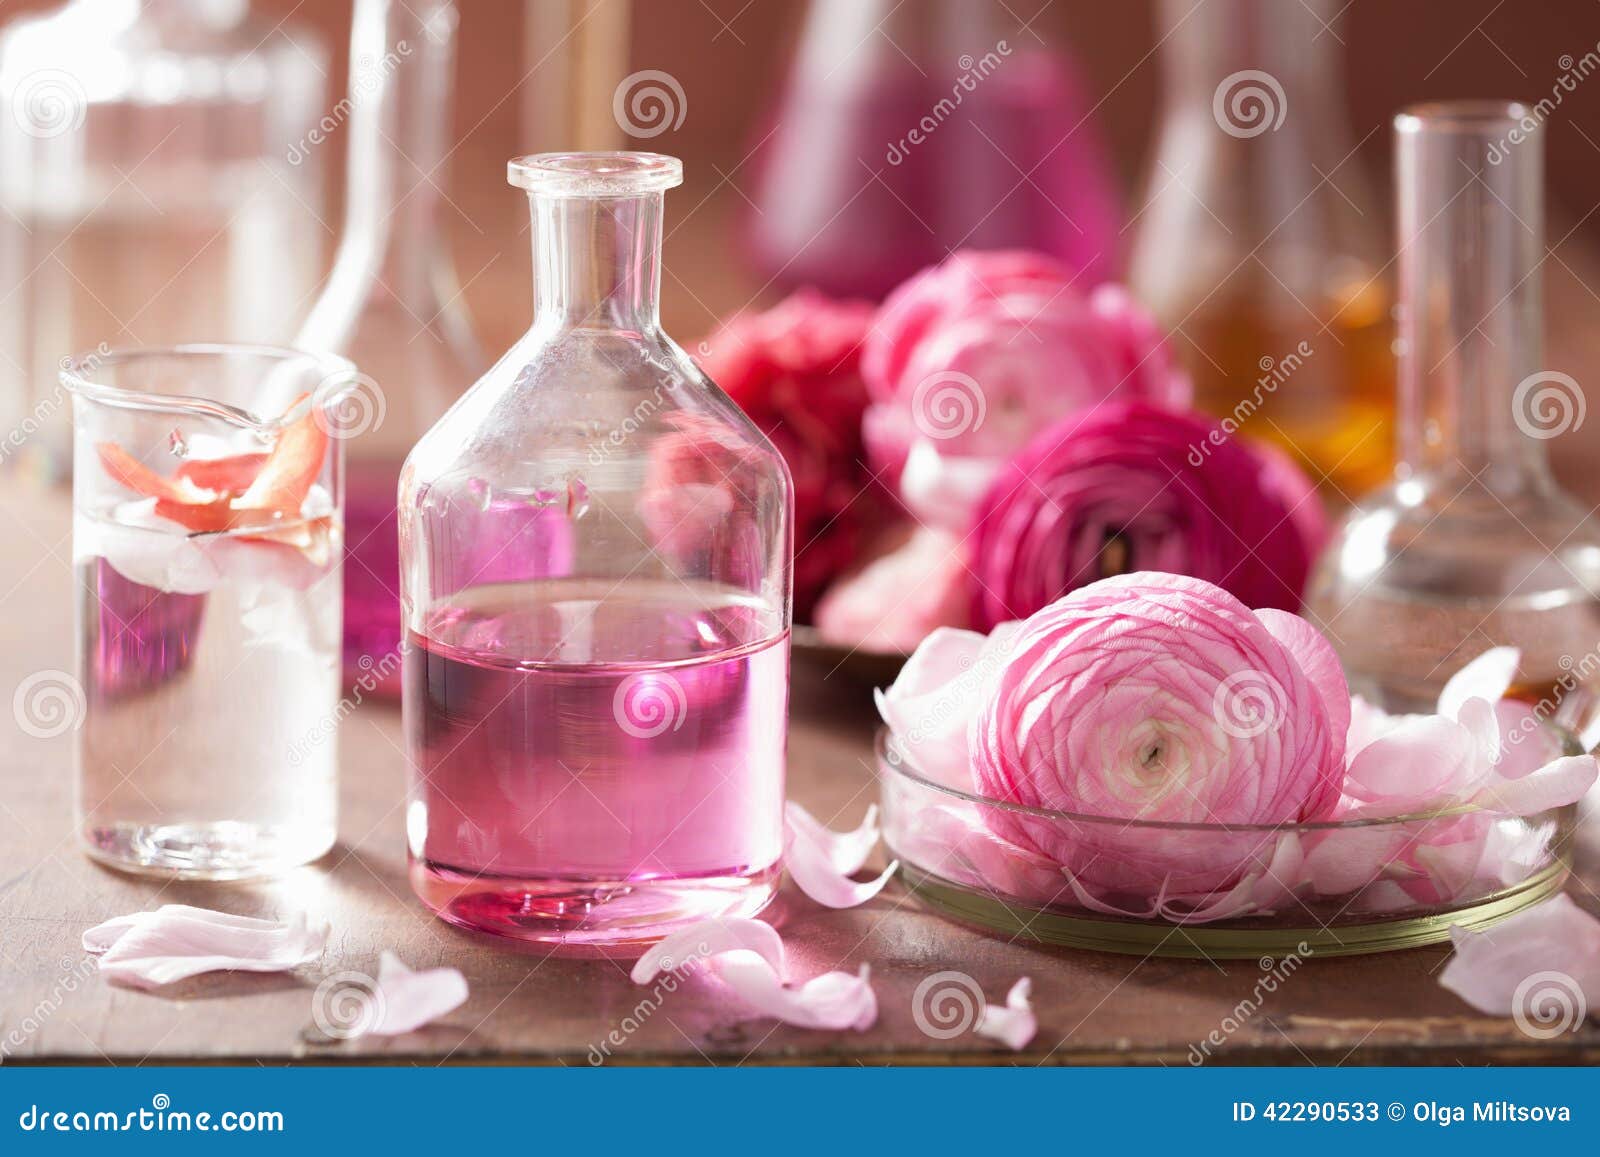 alchemy and aromatherapy set with ranunculus flowers and flasks